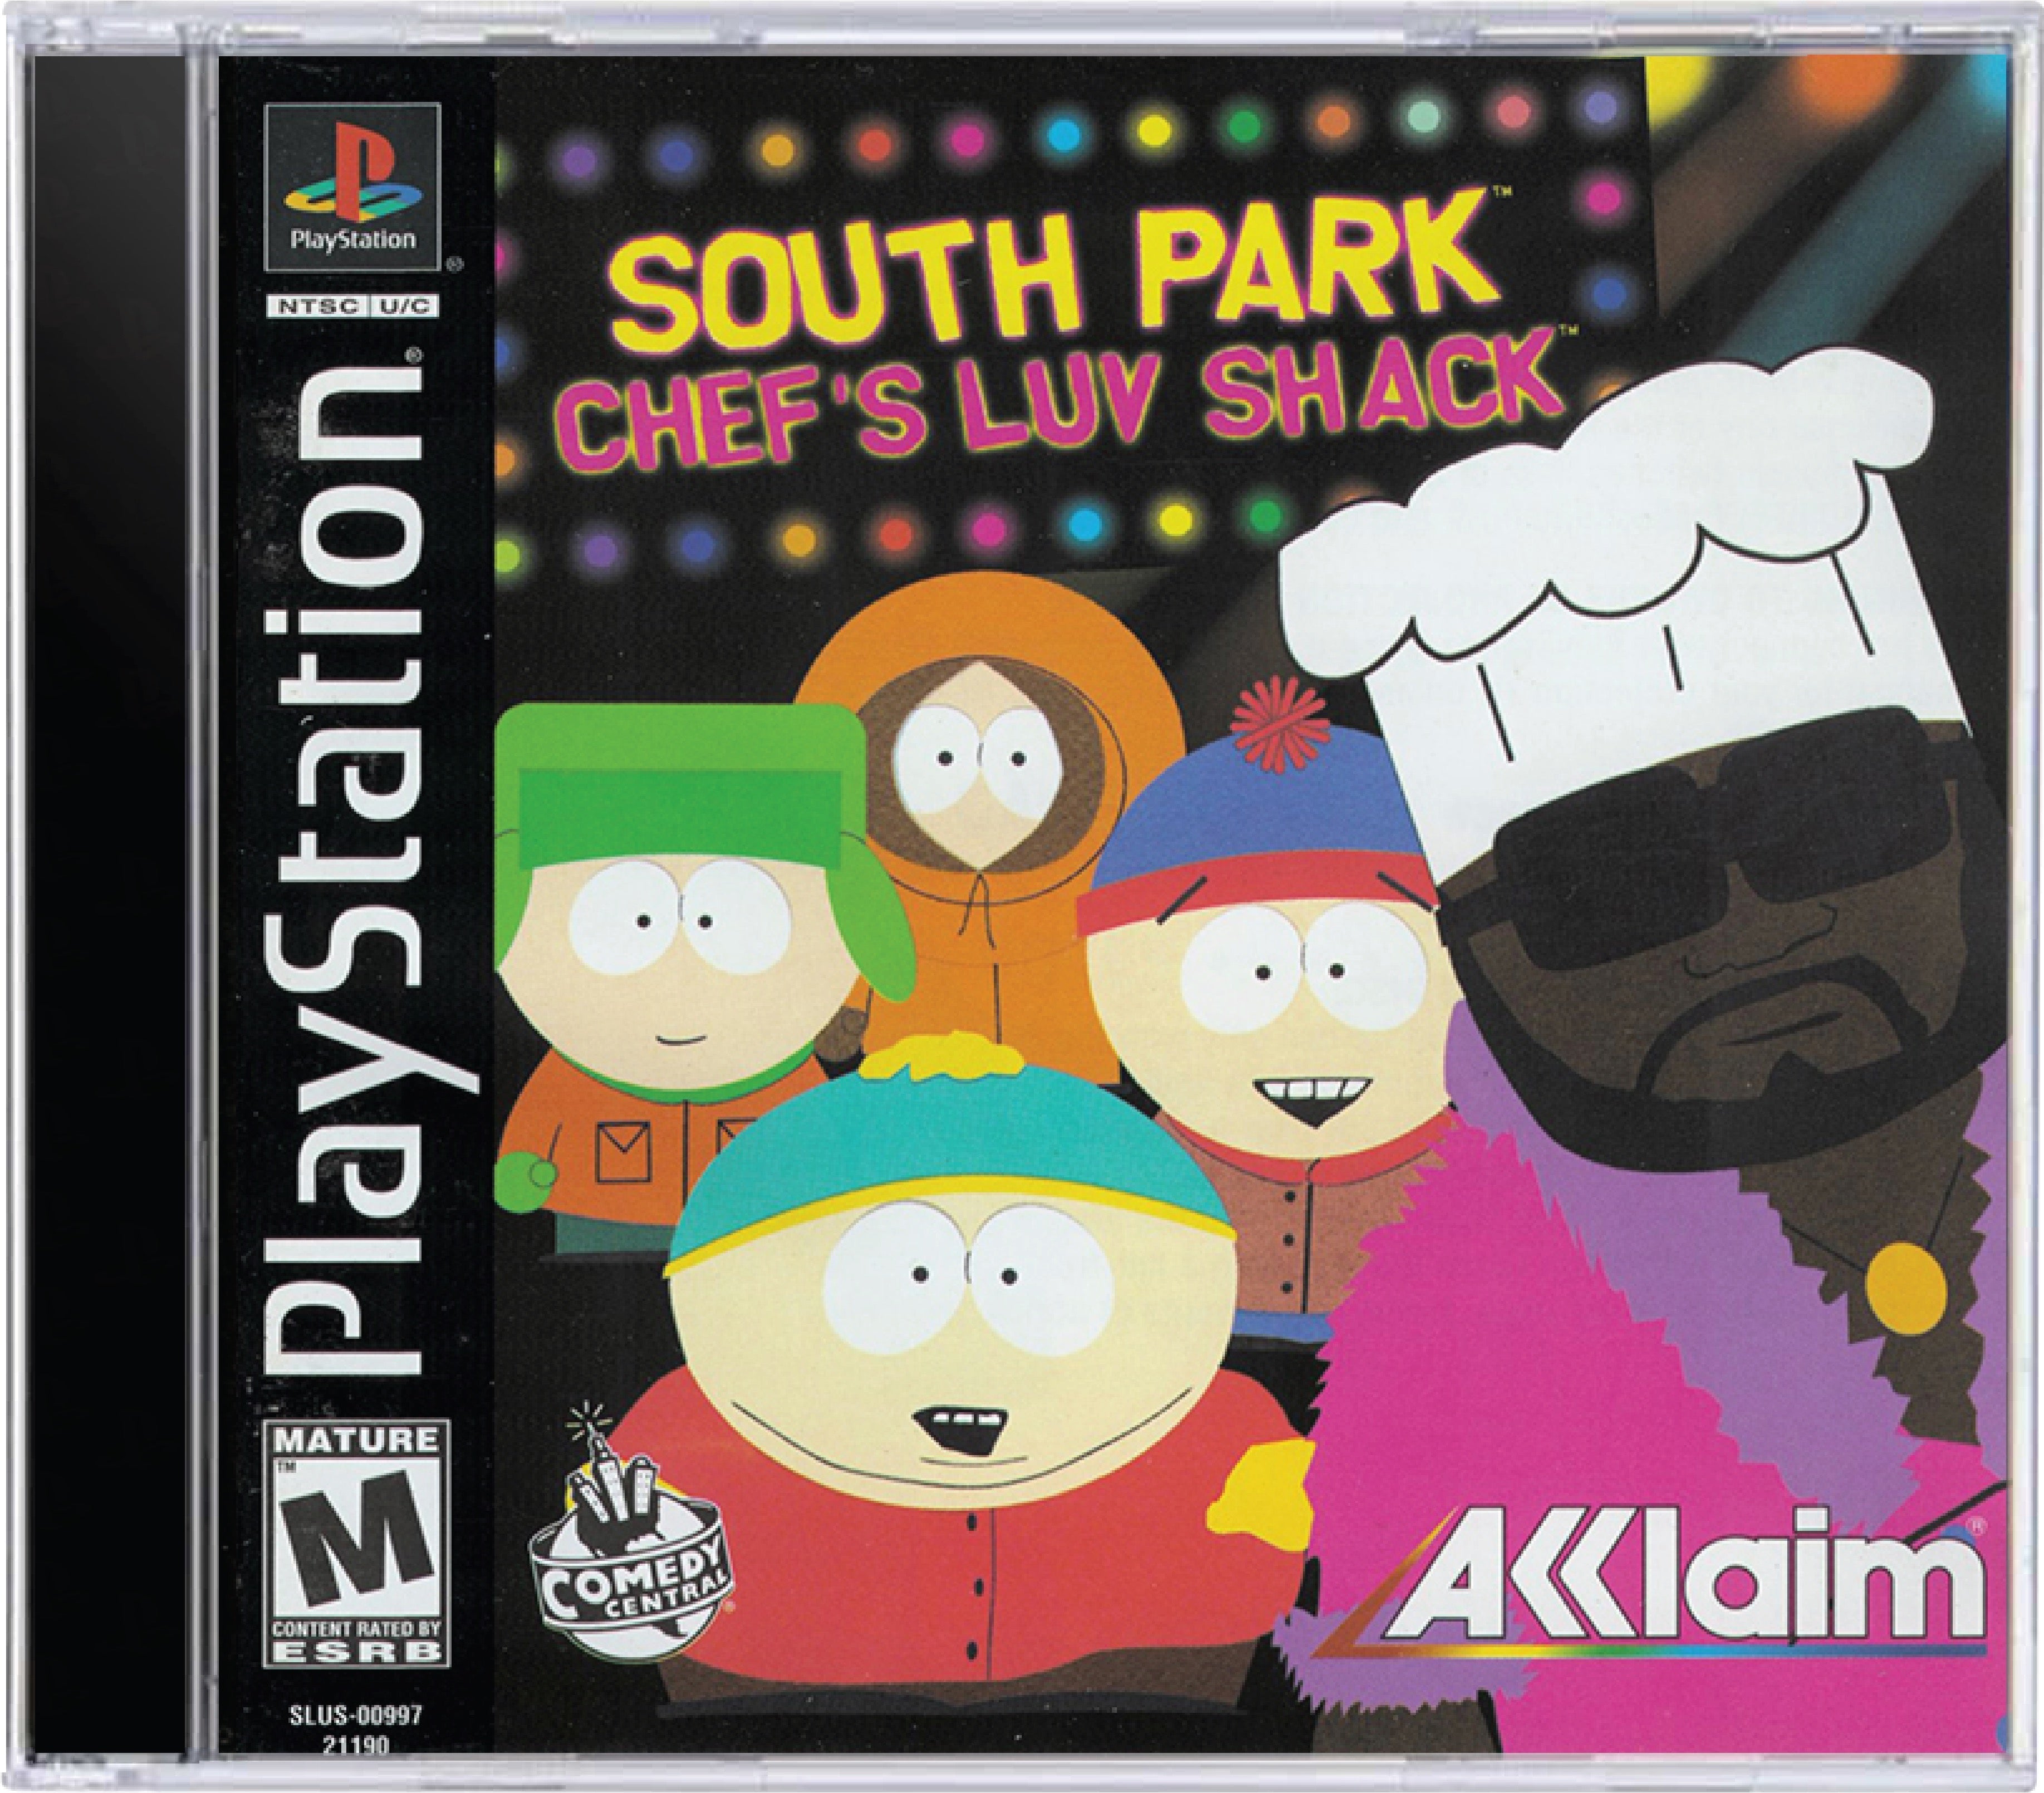 South Park Chef's Luv Shack Cover Art and Product Photo